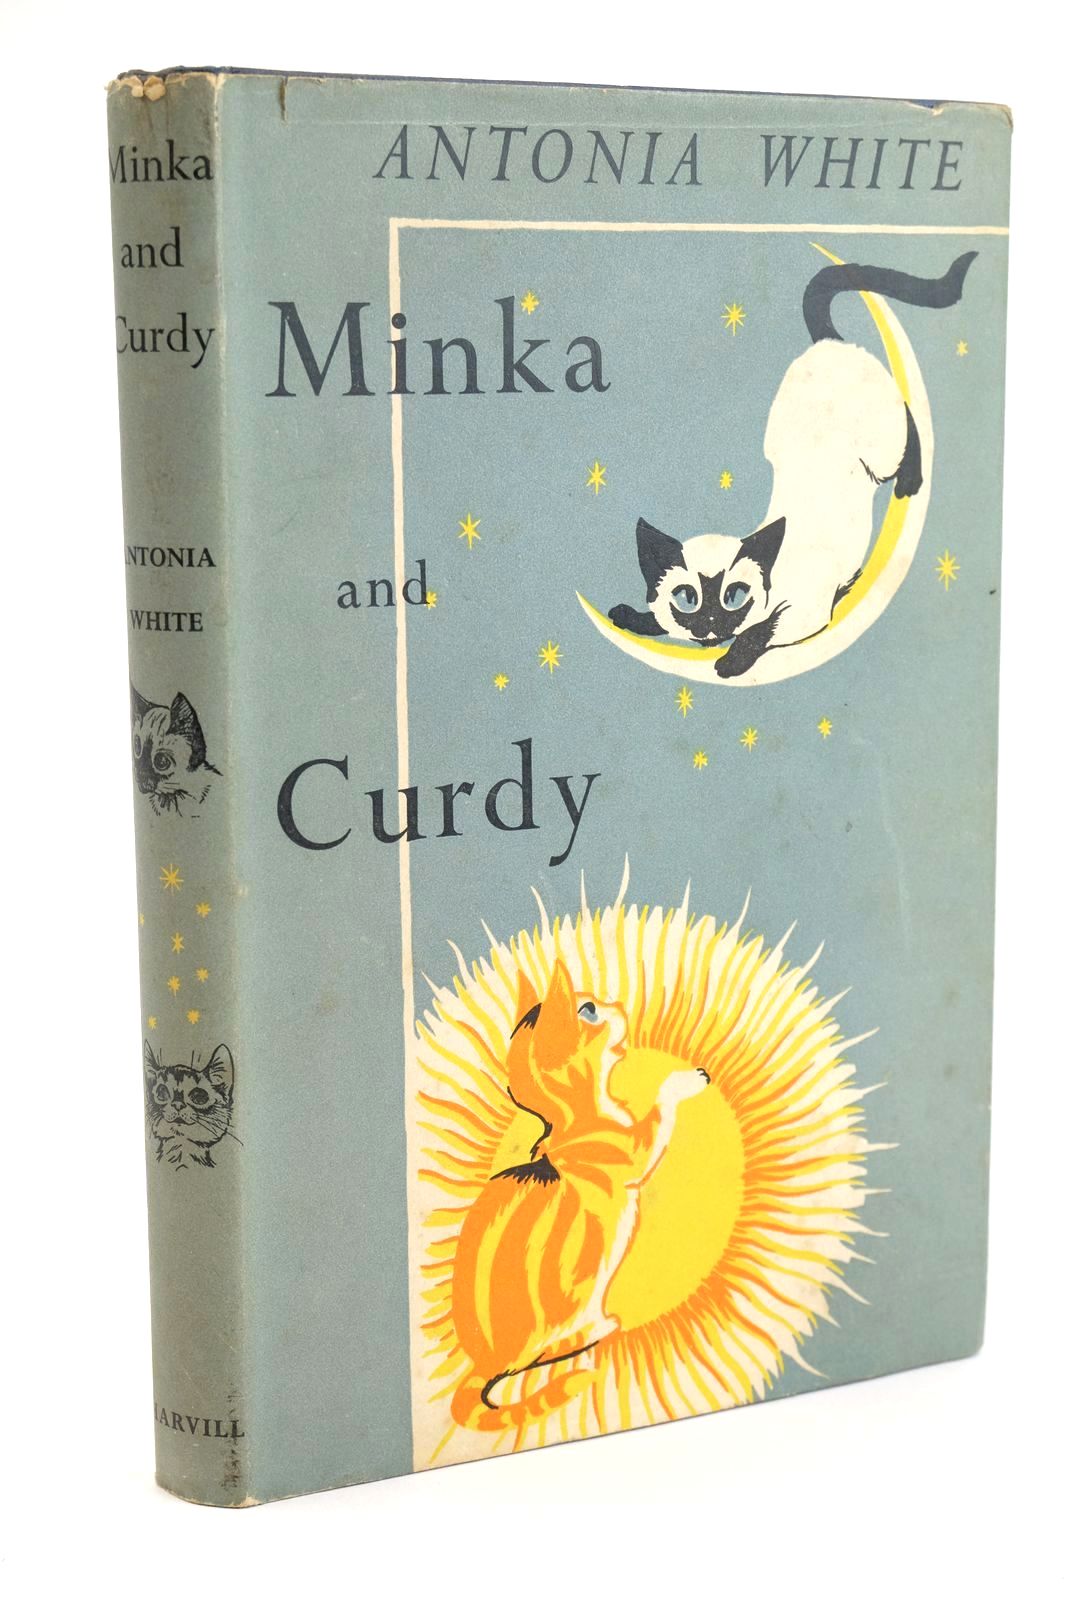 Photo of MINKA AND CURDY- Stock Number: 1323774